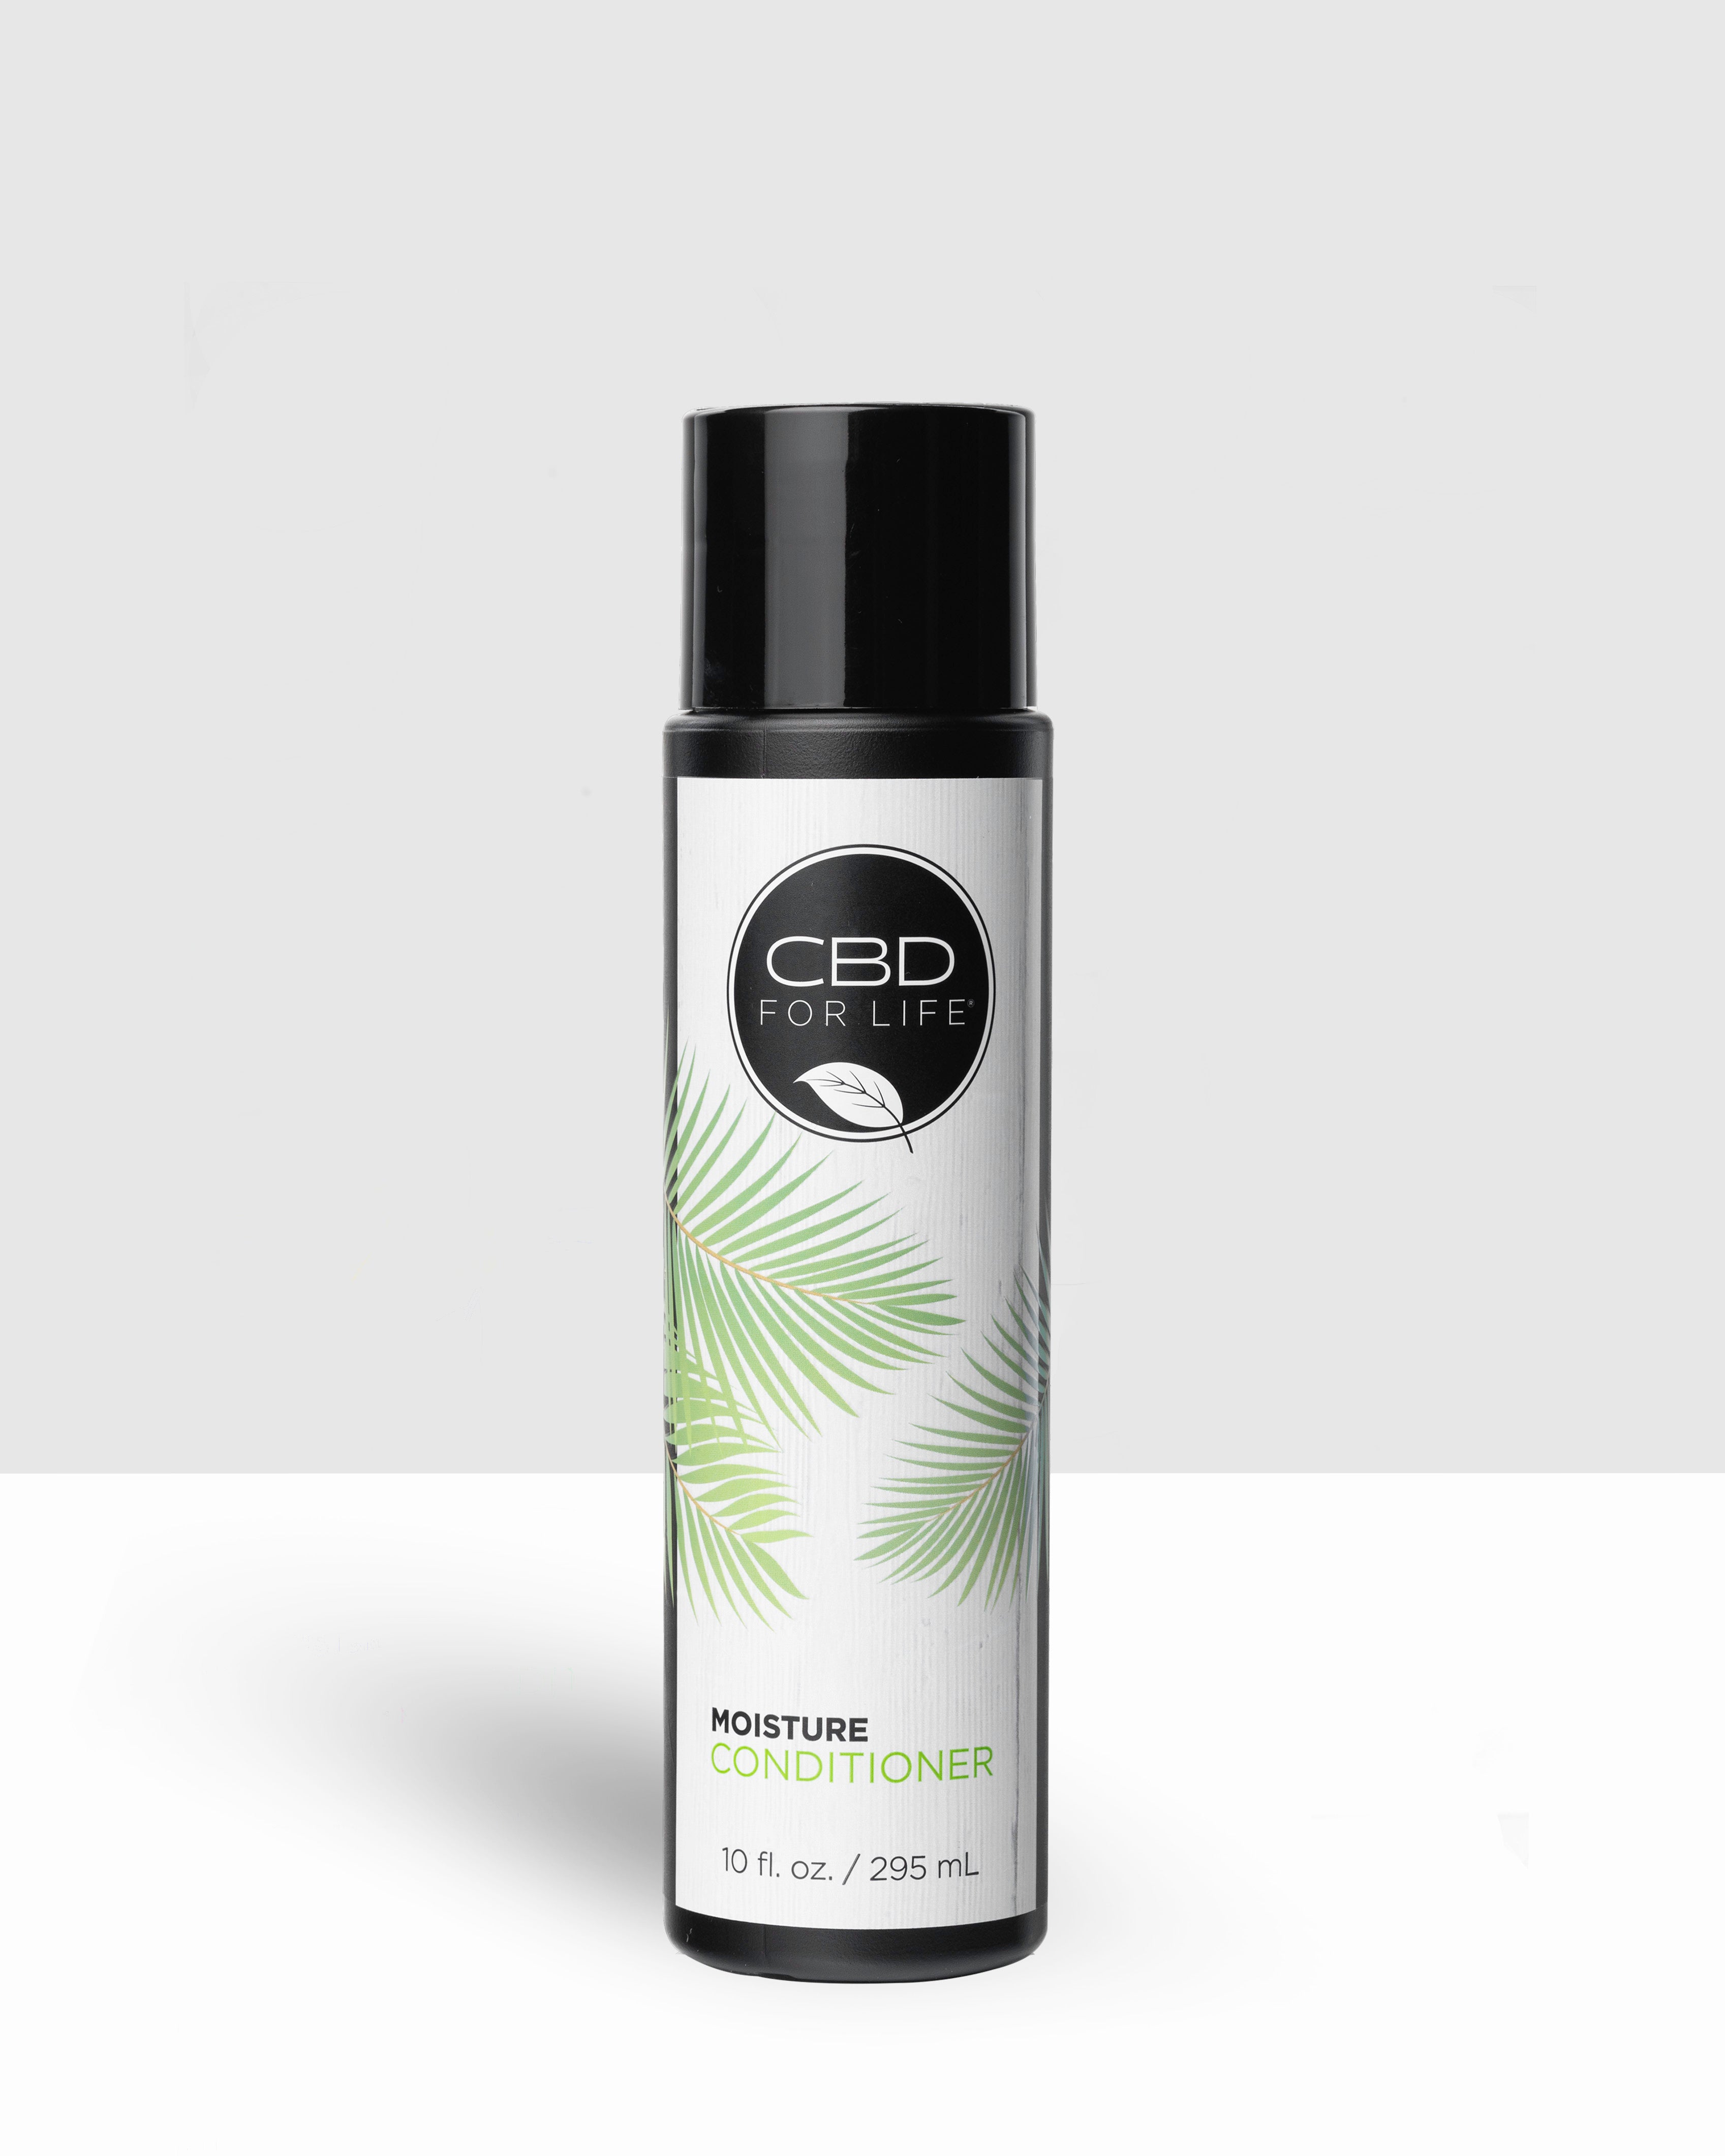 CBD CONDITIONER | Healthy hair starts with CBD For Life $25